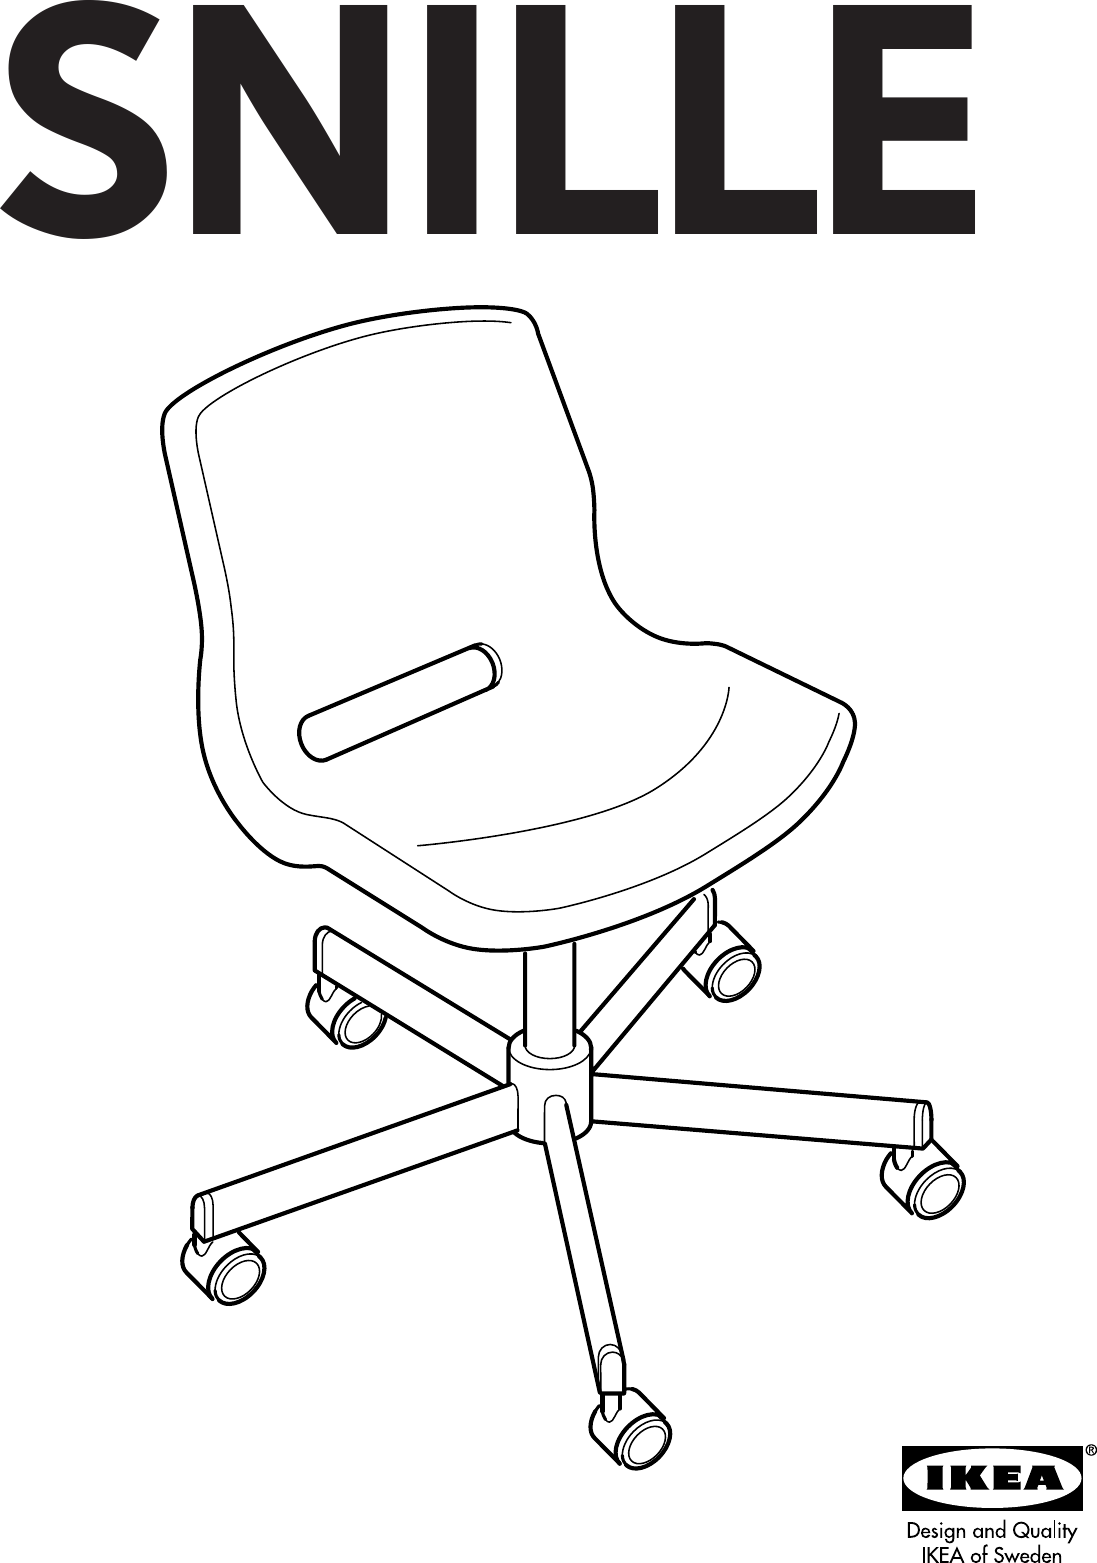 Page 1 of 8 - Ikea Ikea-Snille-Swivel-Chair-Frame-Assembly-Instruction